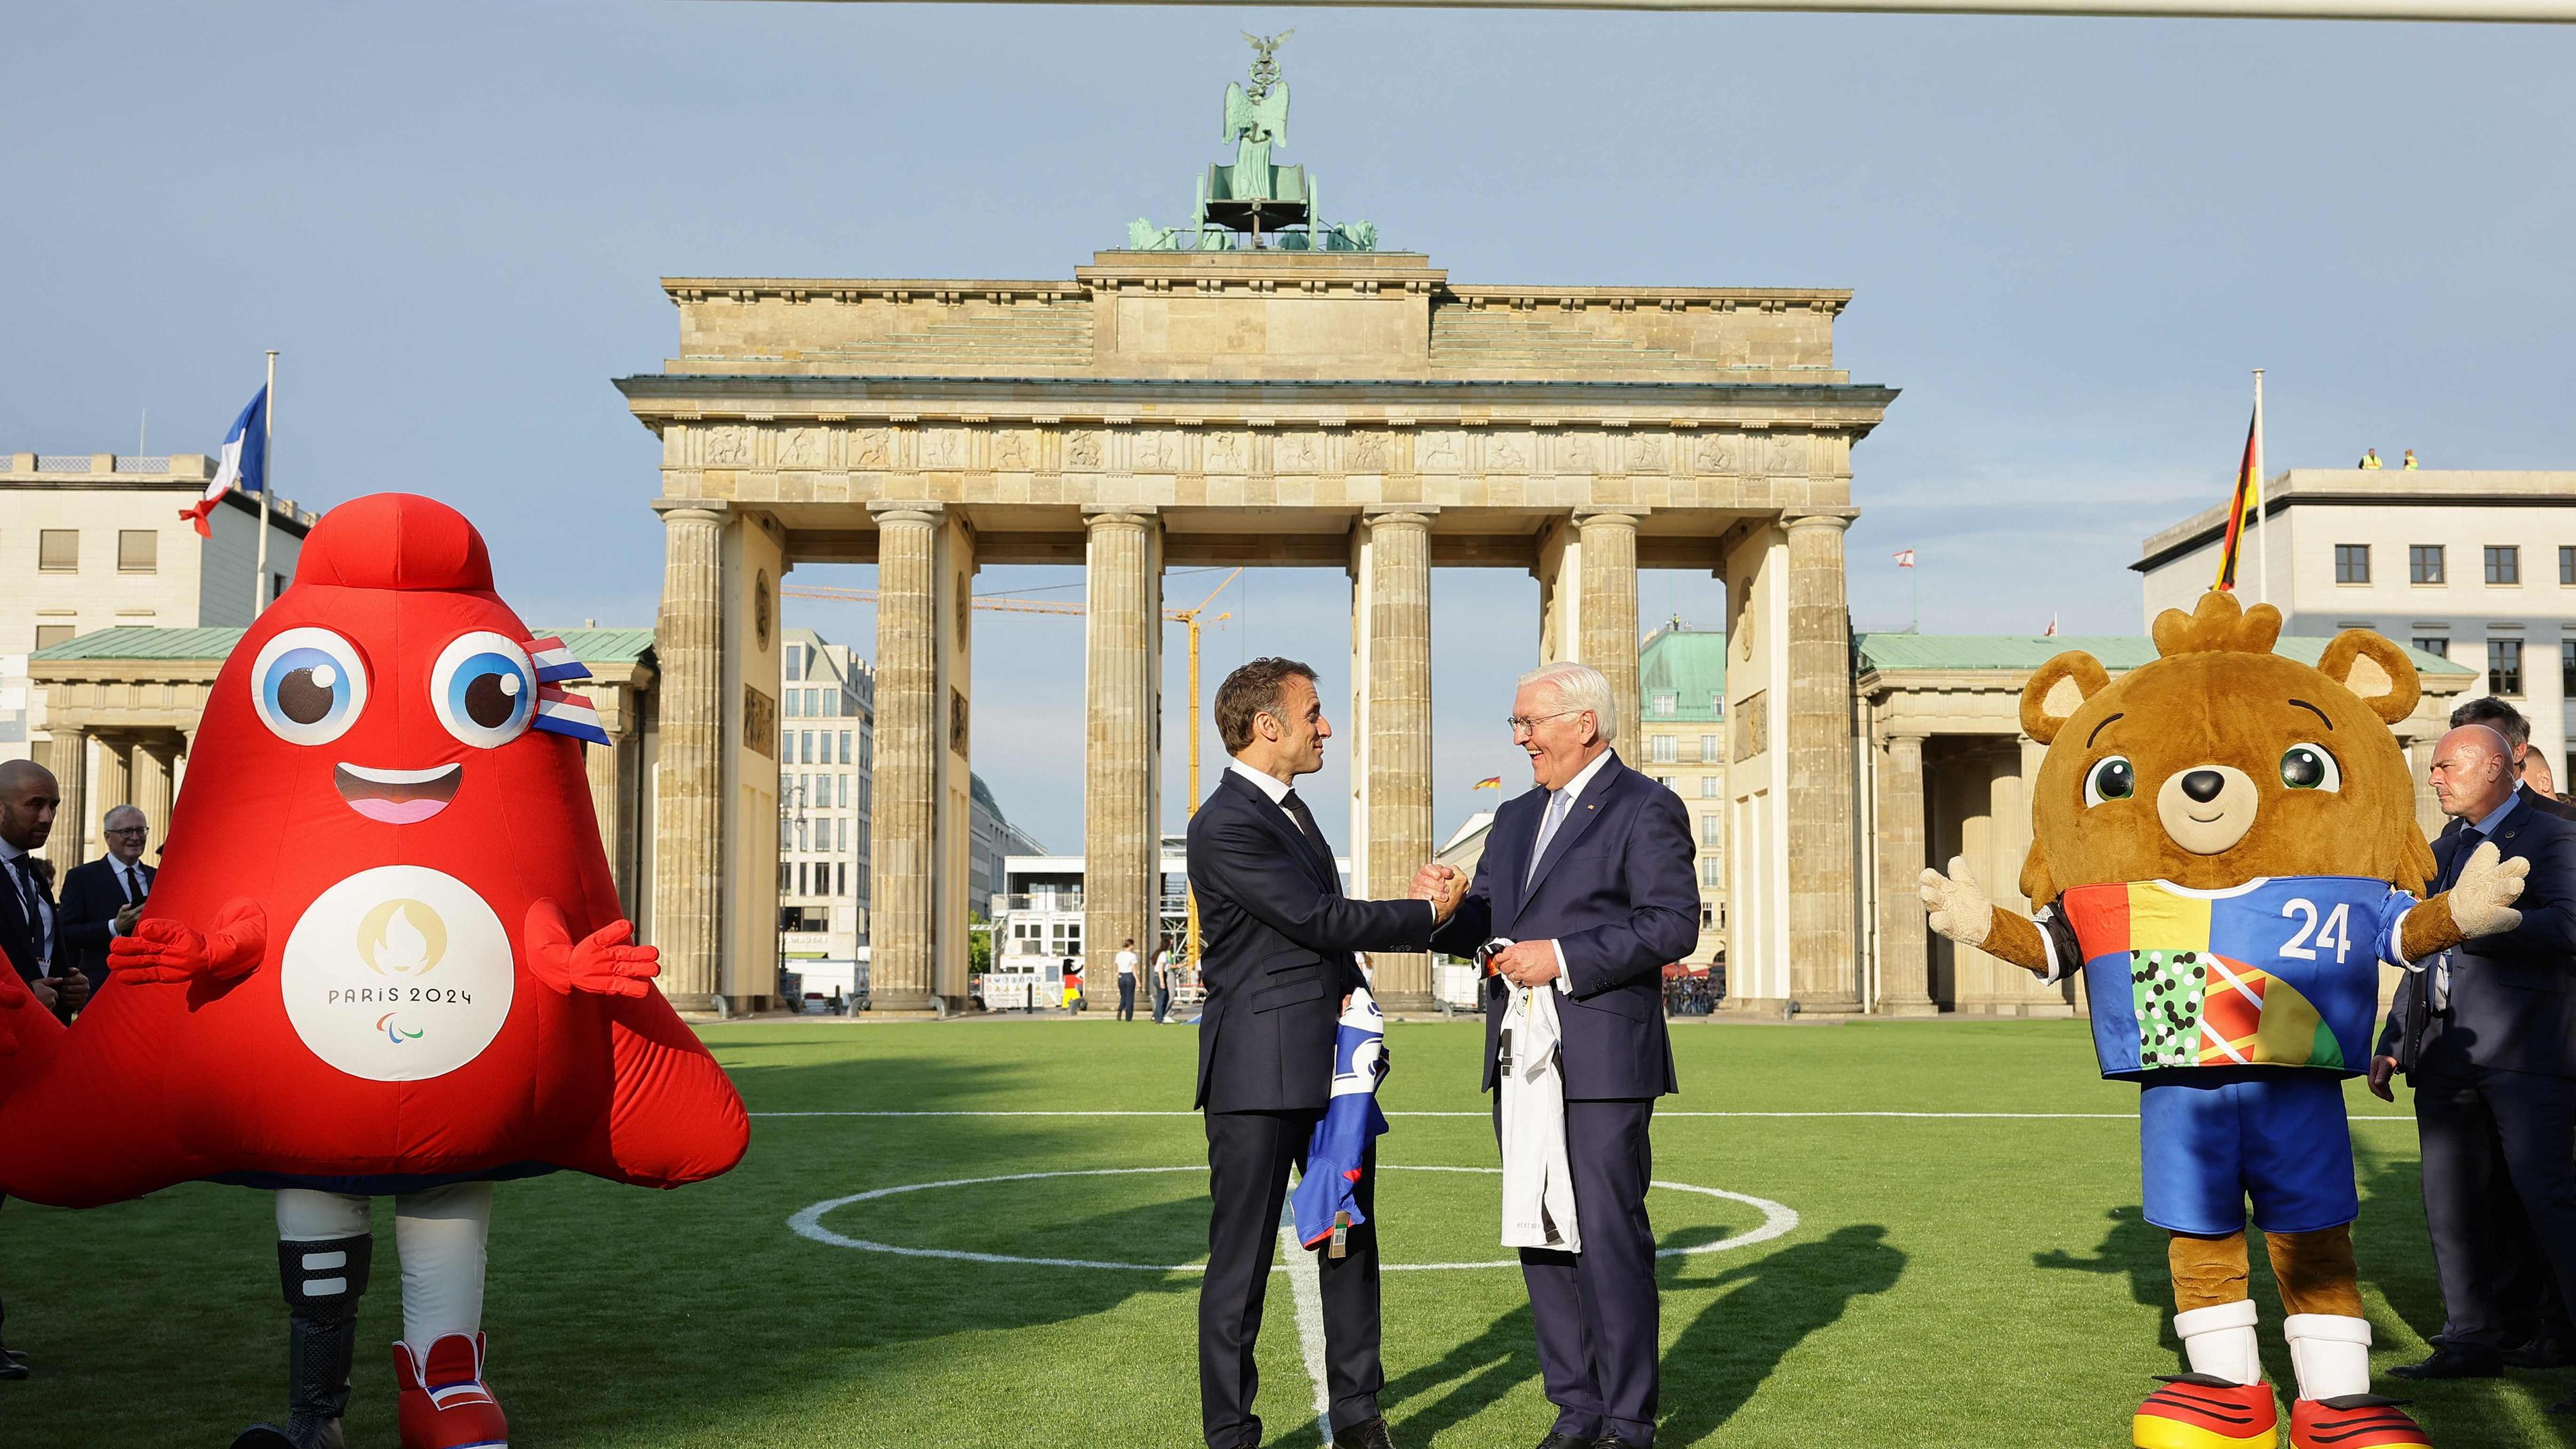 French President Emmanuel Macron and German President Frank-Walter Steinmeier shake hands as they exchance football shirts next to "Albaert" the official mascot of the UEFA Euro 2024 European Football Championship (R) and "Phryge" the Paris 2024 Olympic mascot, as they inaugurate the German-French Sports Summer 2024 in front of the Brandenburg Gate in Berlin, Germany on May 26, 2024. 